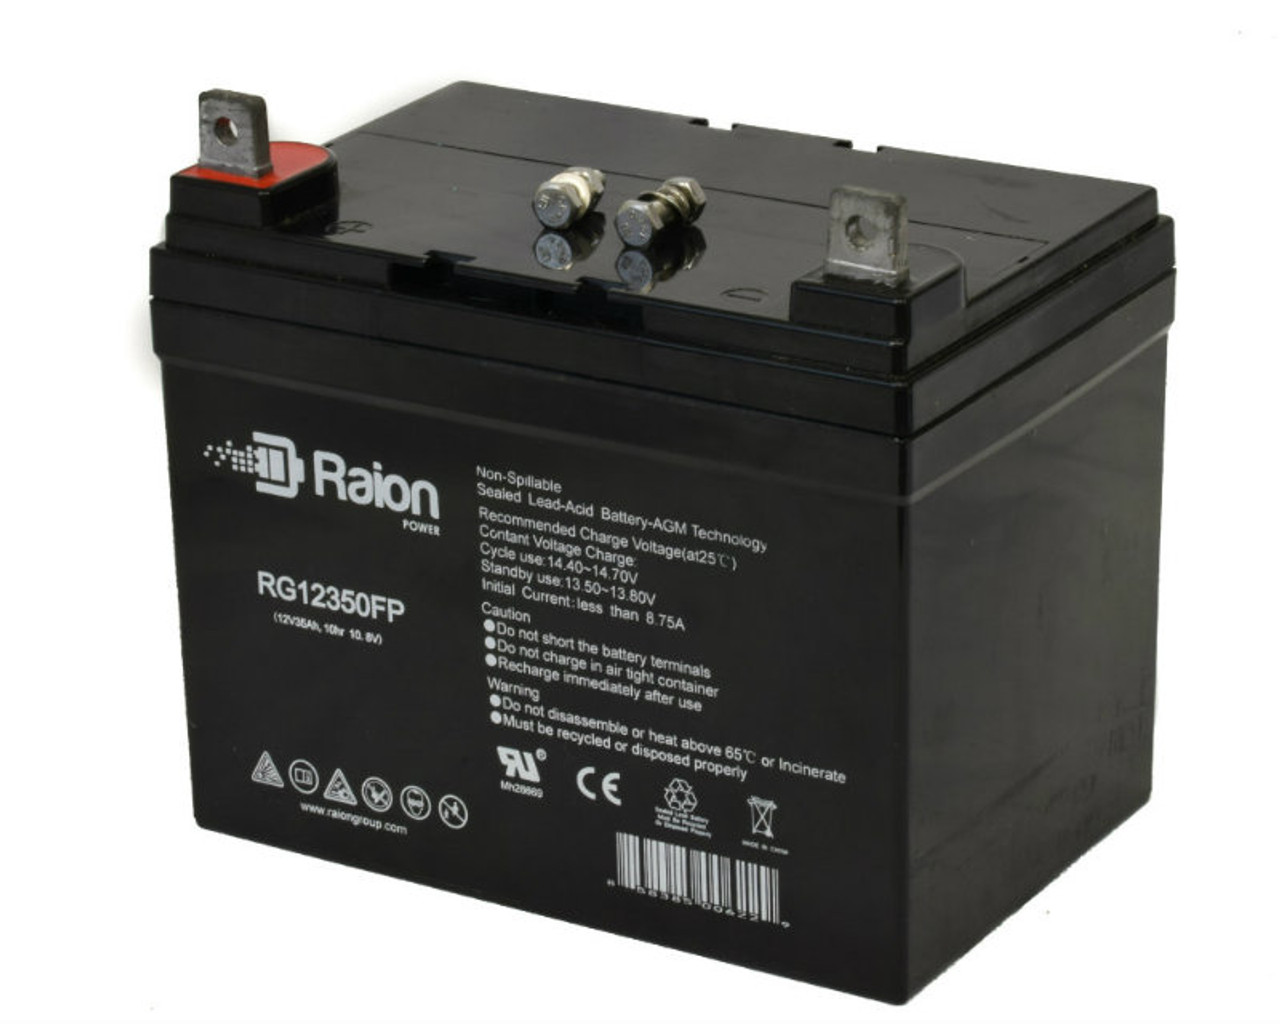 Raion Power Replacement 12V 35Ah Battery for Gilson GT14 - 1 Pack